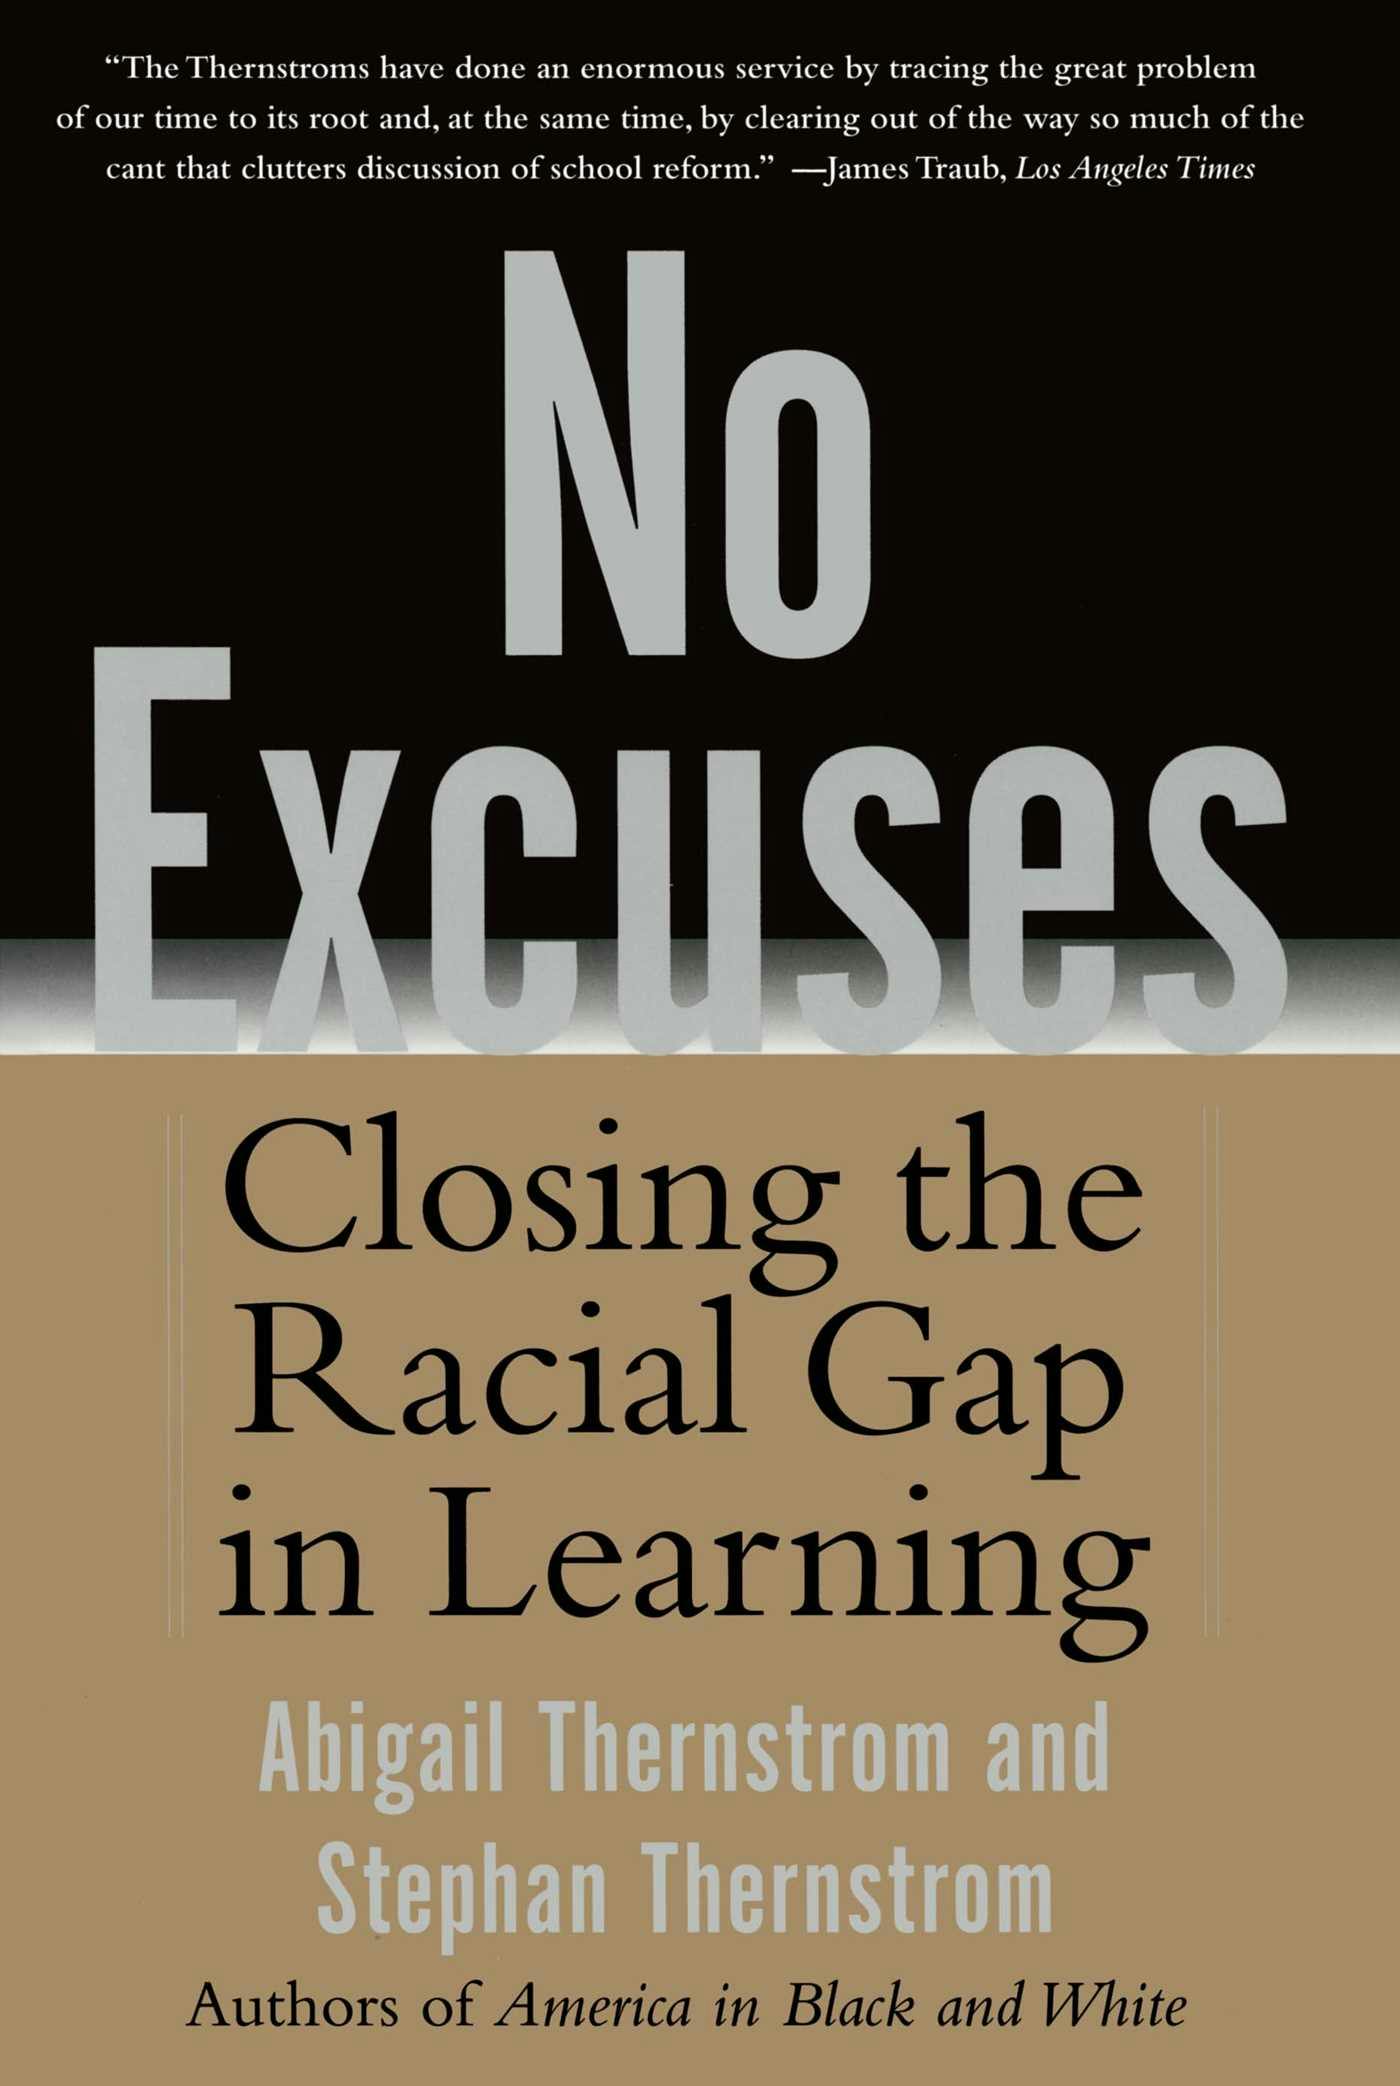 No Excuses: Closing the Racial Gap in Learning - Abigail Thernstrom, Stephan Thernstrom